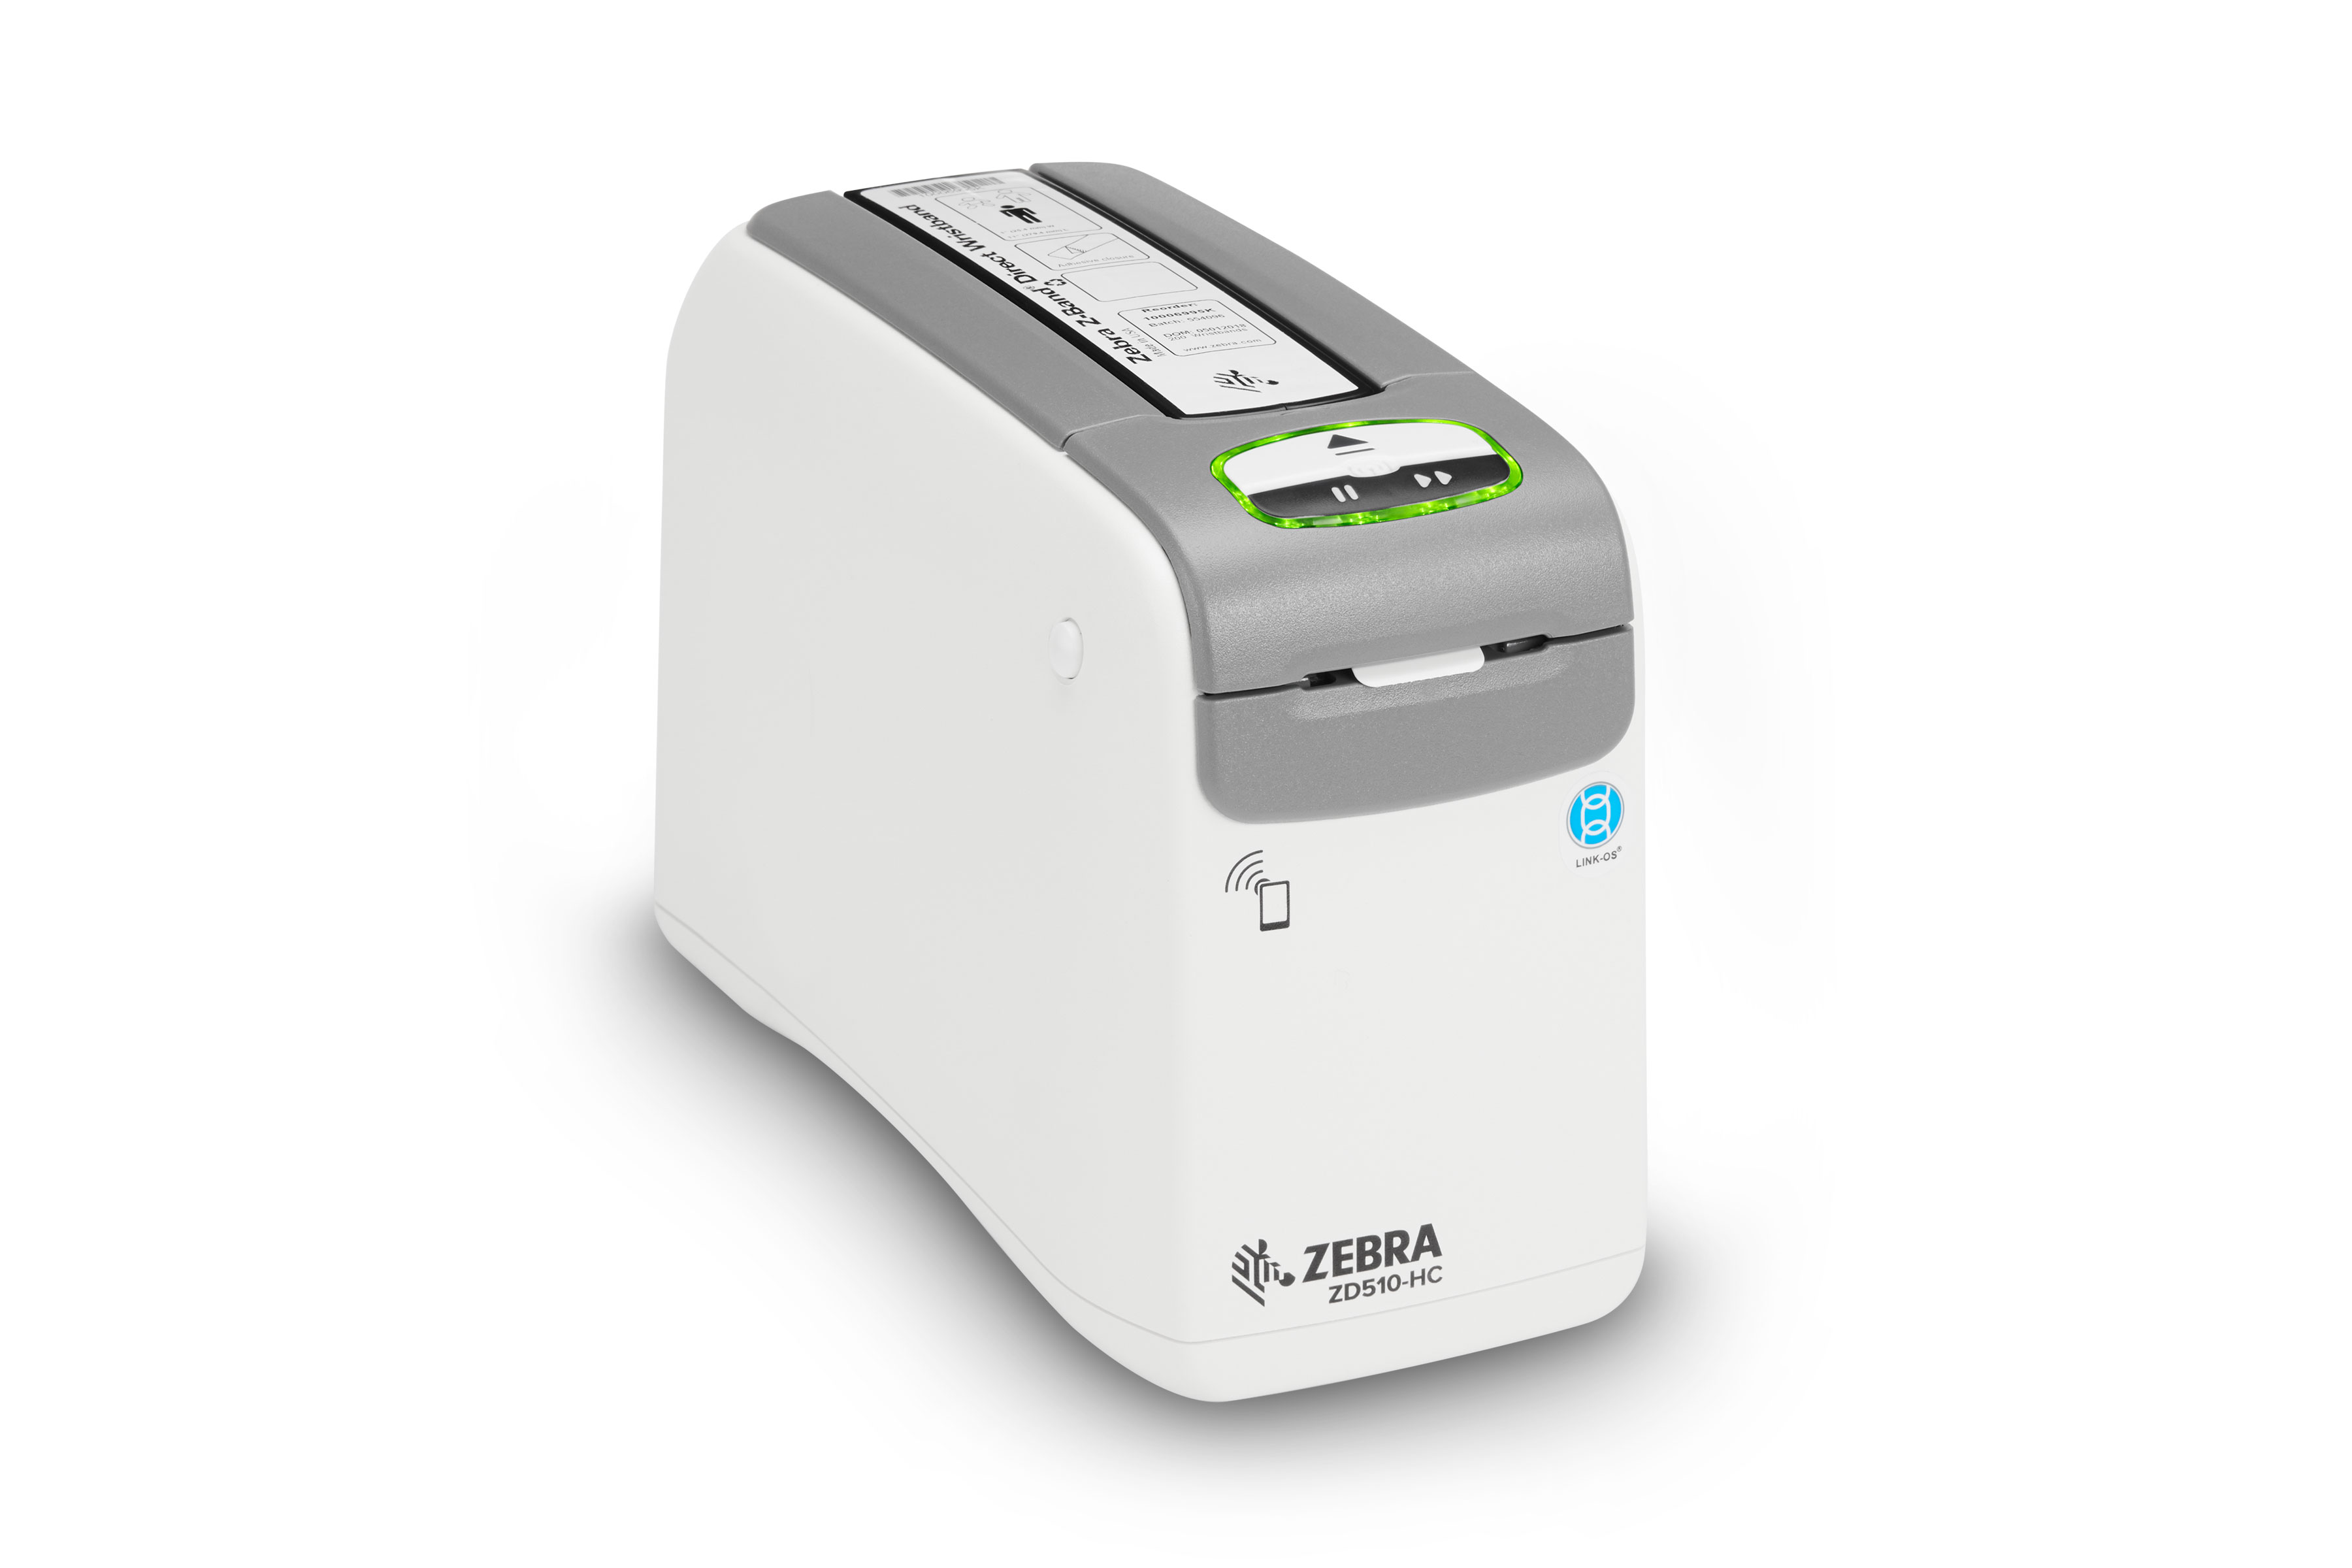 Top right view of a Zebra ZD510-HC Wristband printer for healthcare